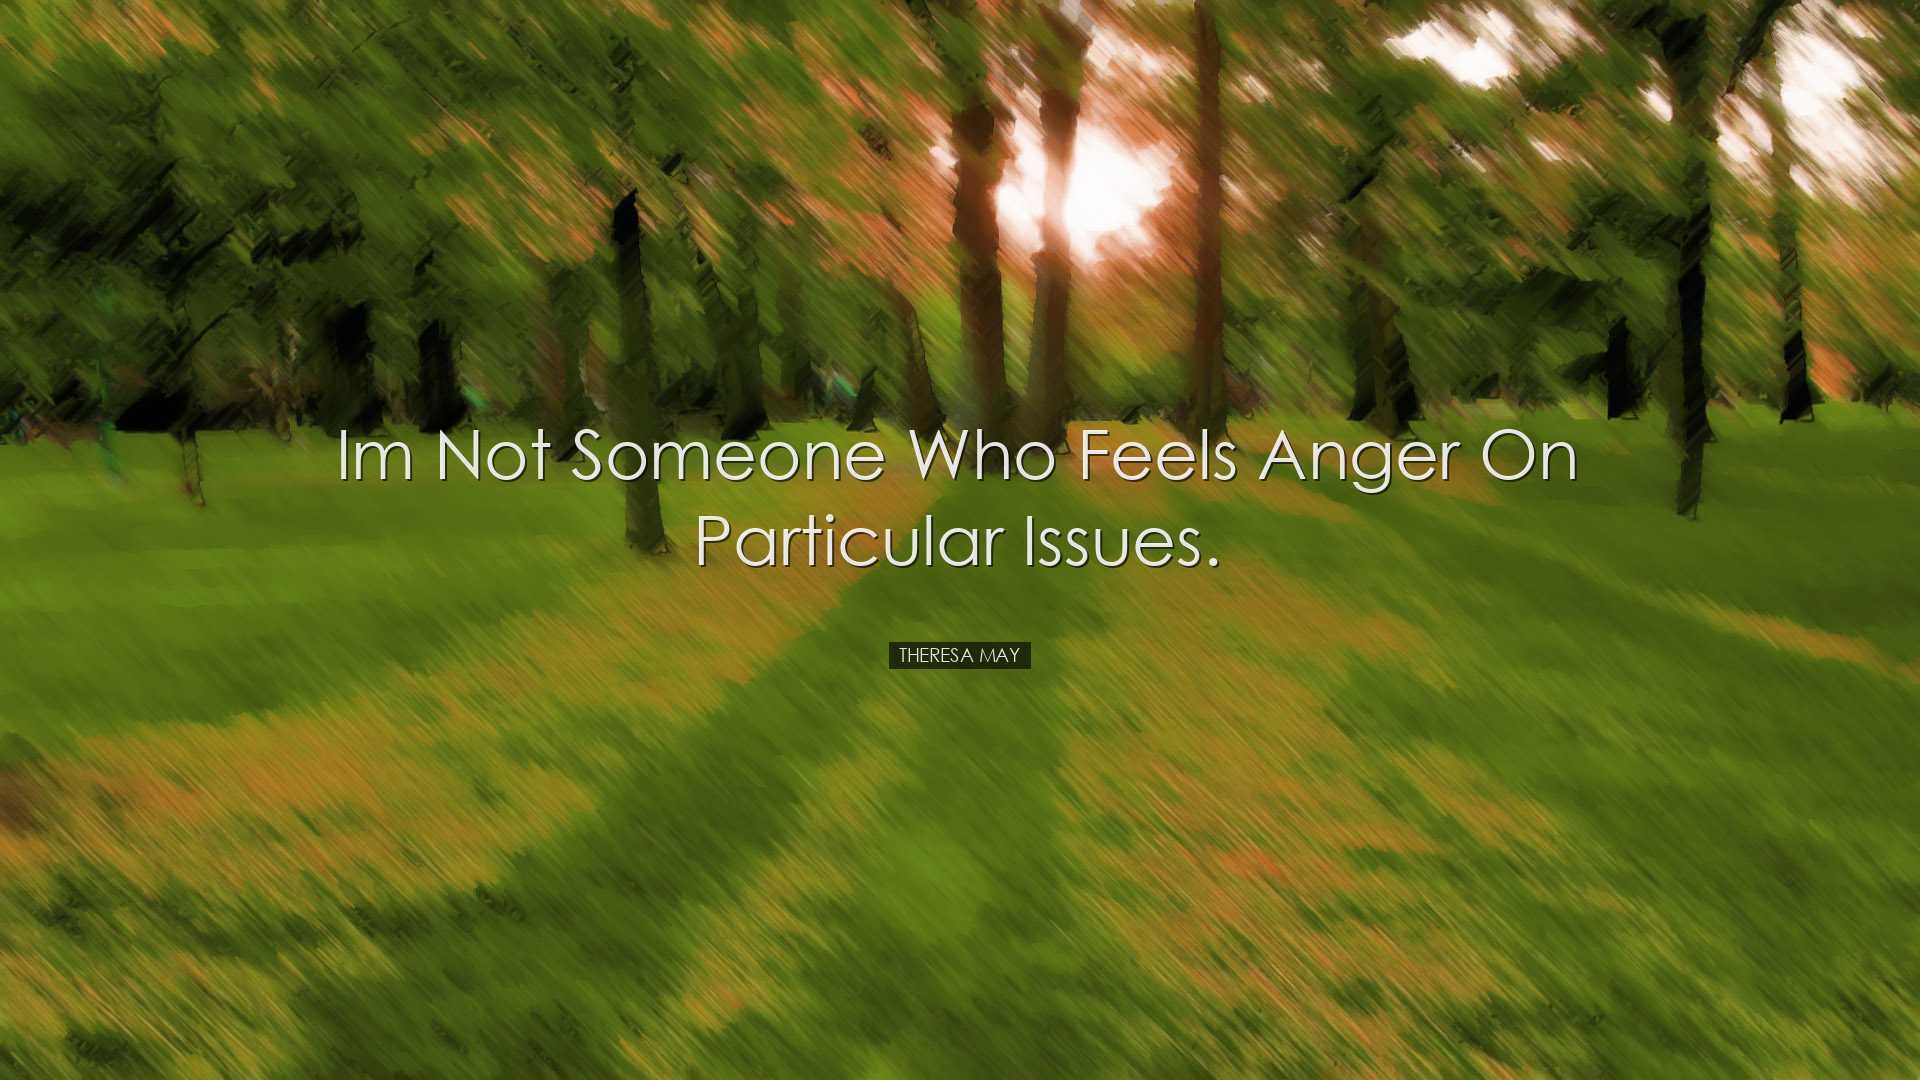 Im not someone who feels anger on particular issues. - Theresa May